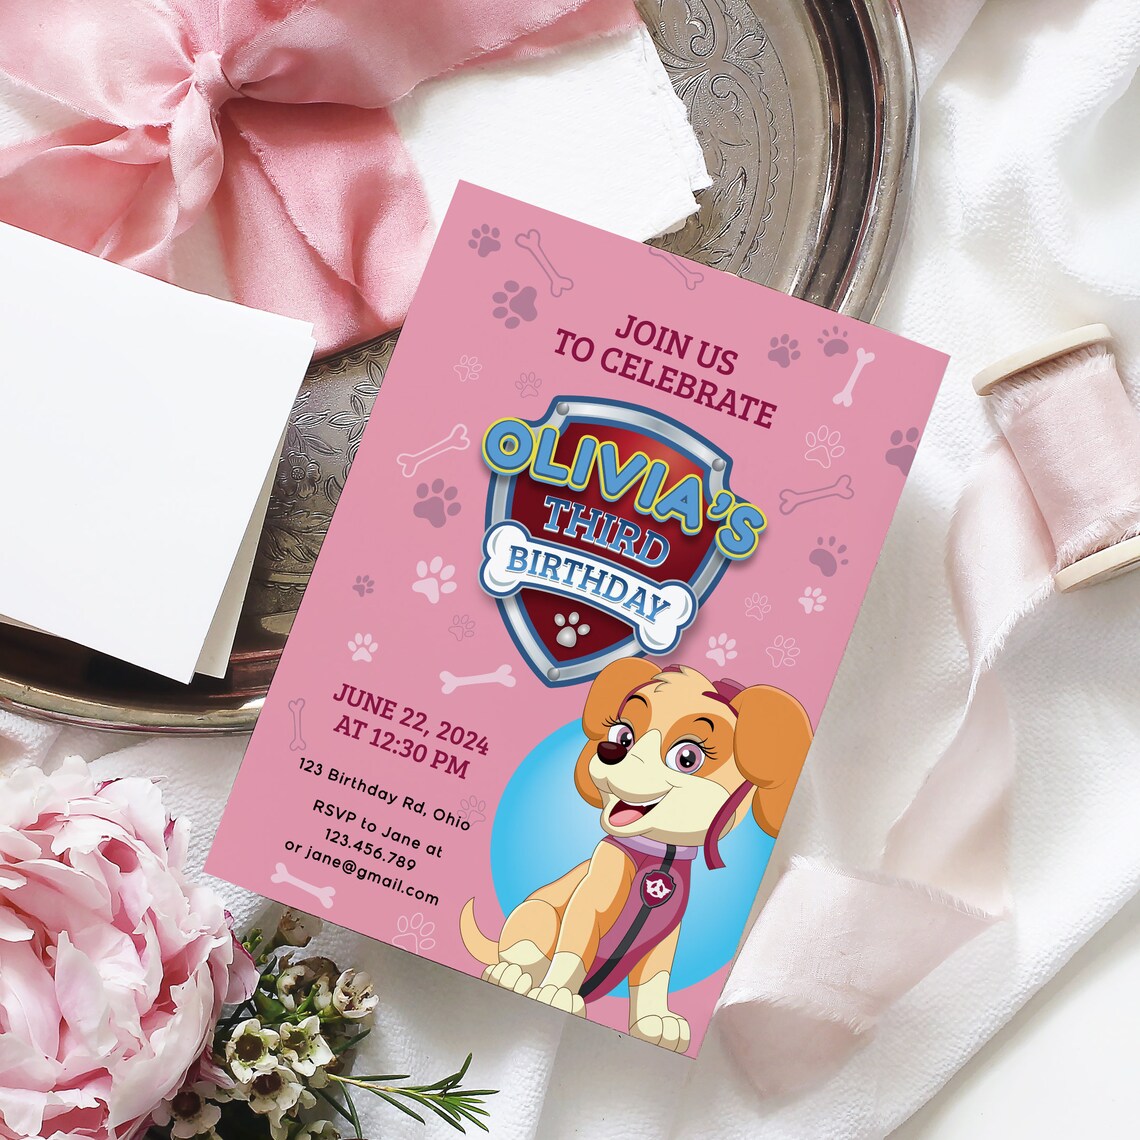 first birthday invitation for a baby girl with pink design featuring little cartoon dog